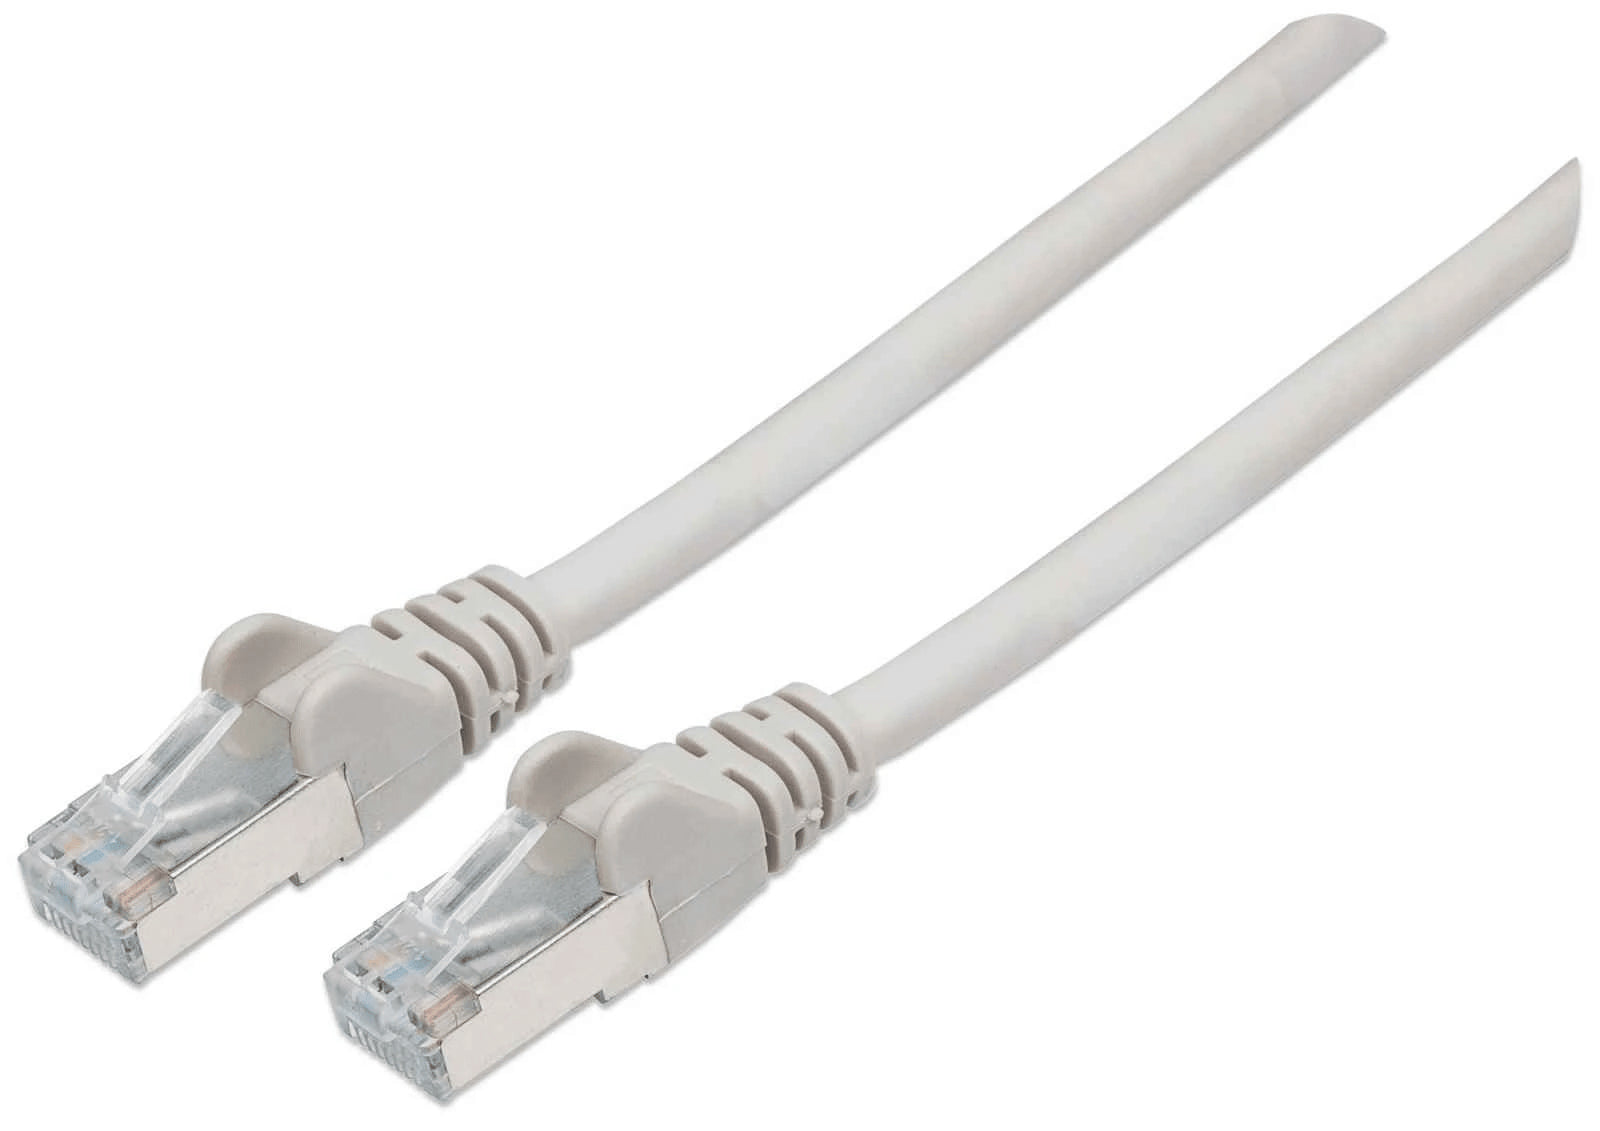 Intellinet Network Patch Cable, Cat7 Cable/Cat6A Plugs, 3m, Grey, Copper, S/FTP, LSOH / LSZH, PVC, RJ45, Gold Plated Contacts, Snagless, Booted, Lifetime Warranty, Polybag